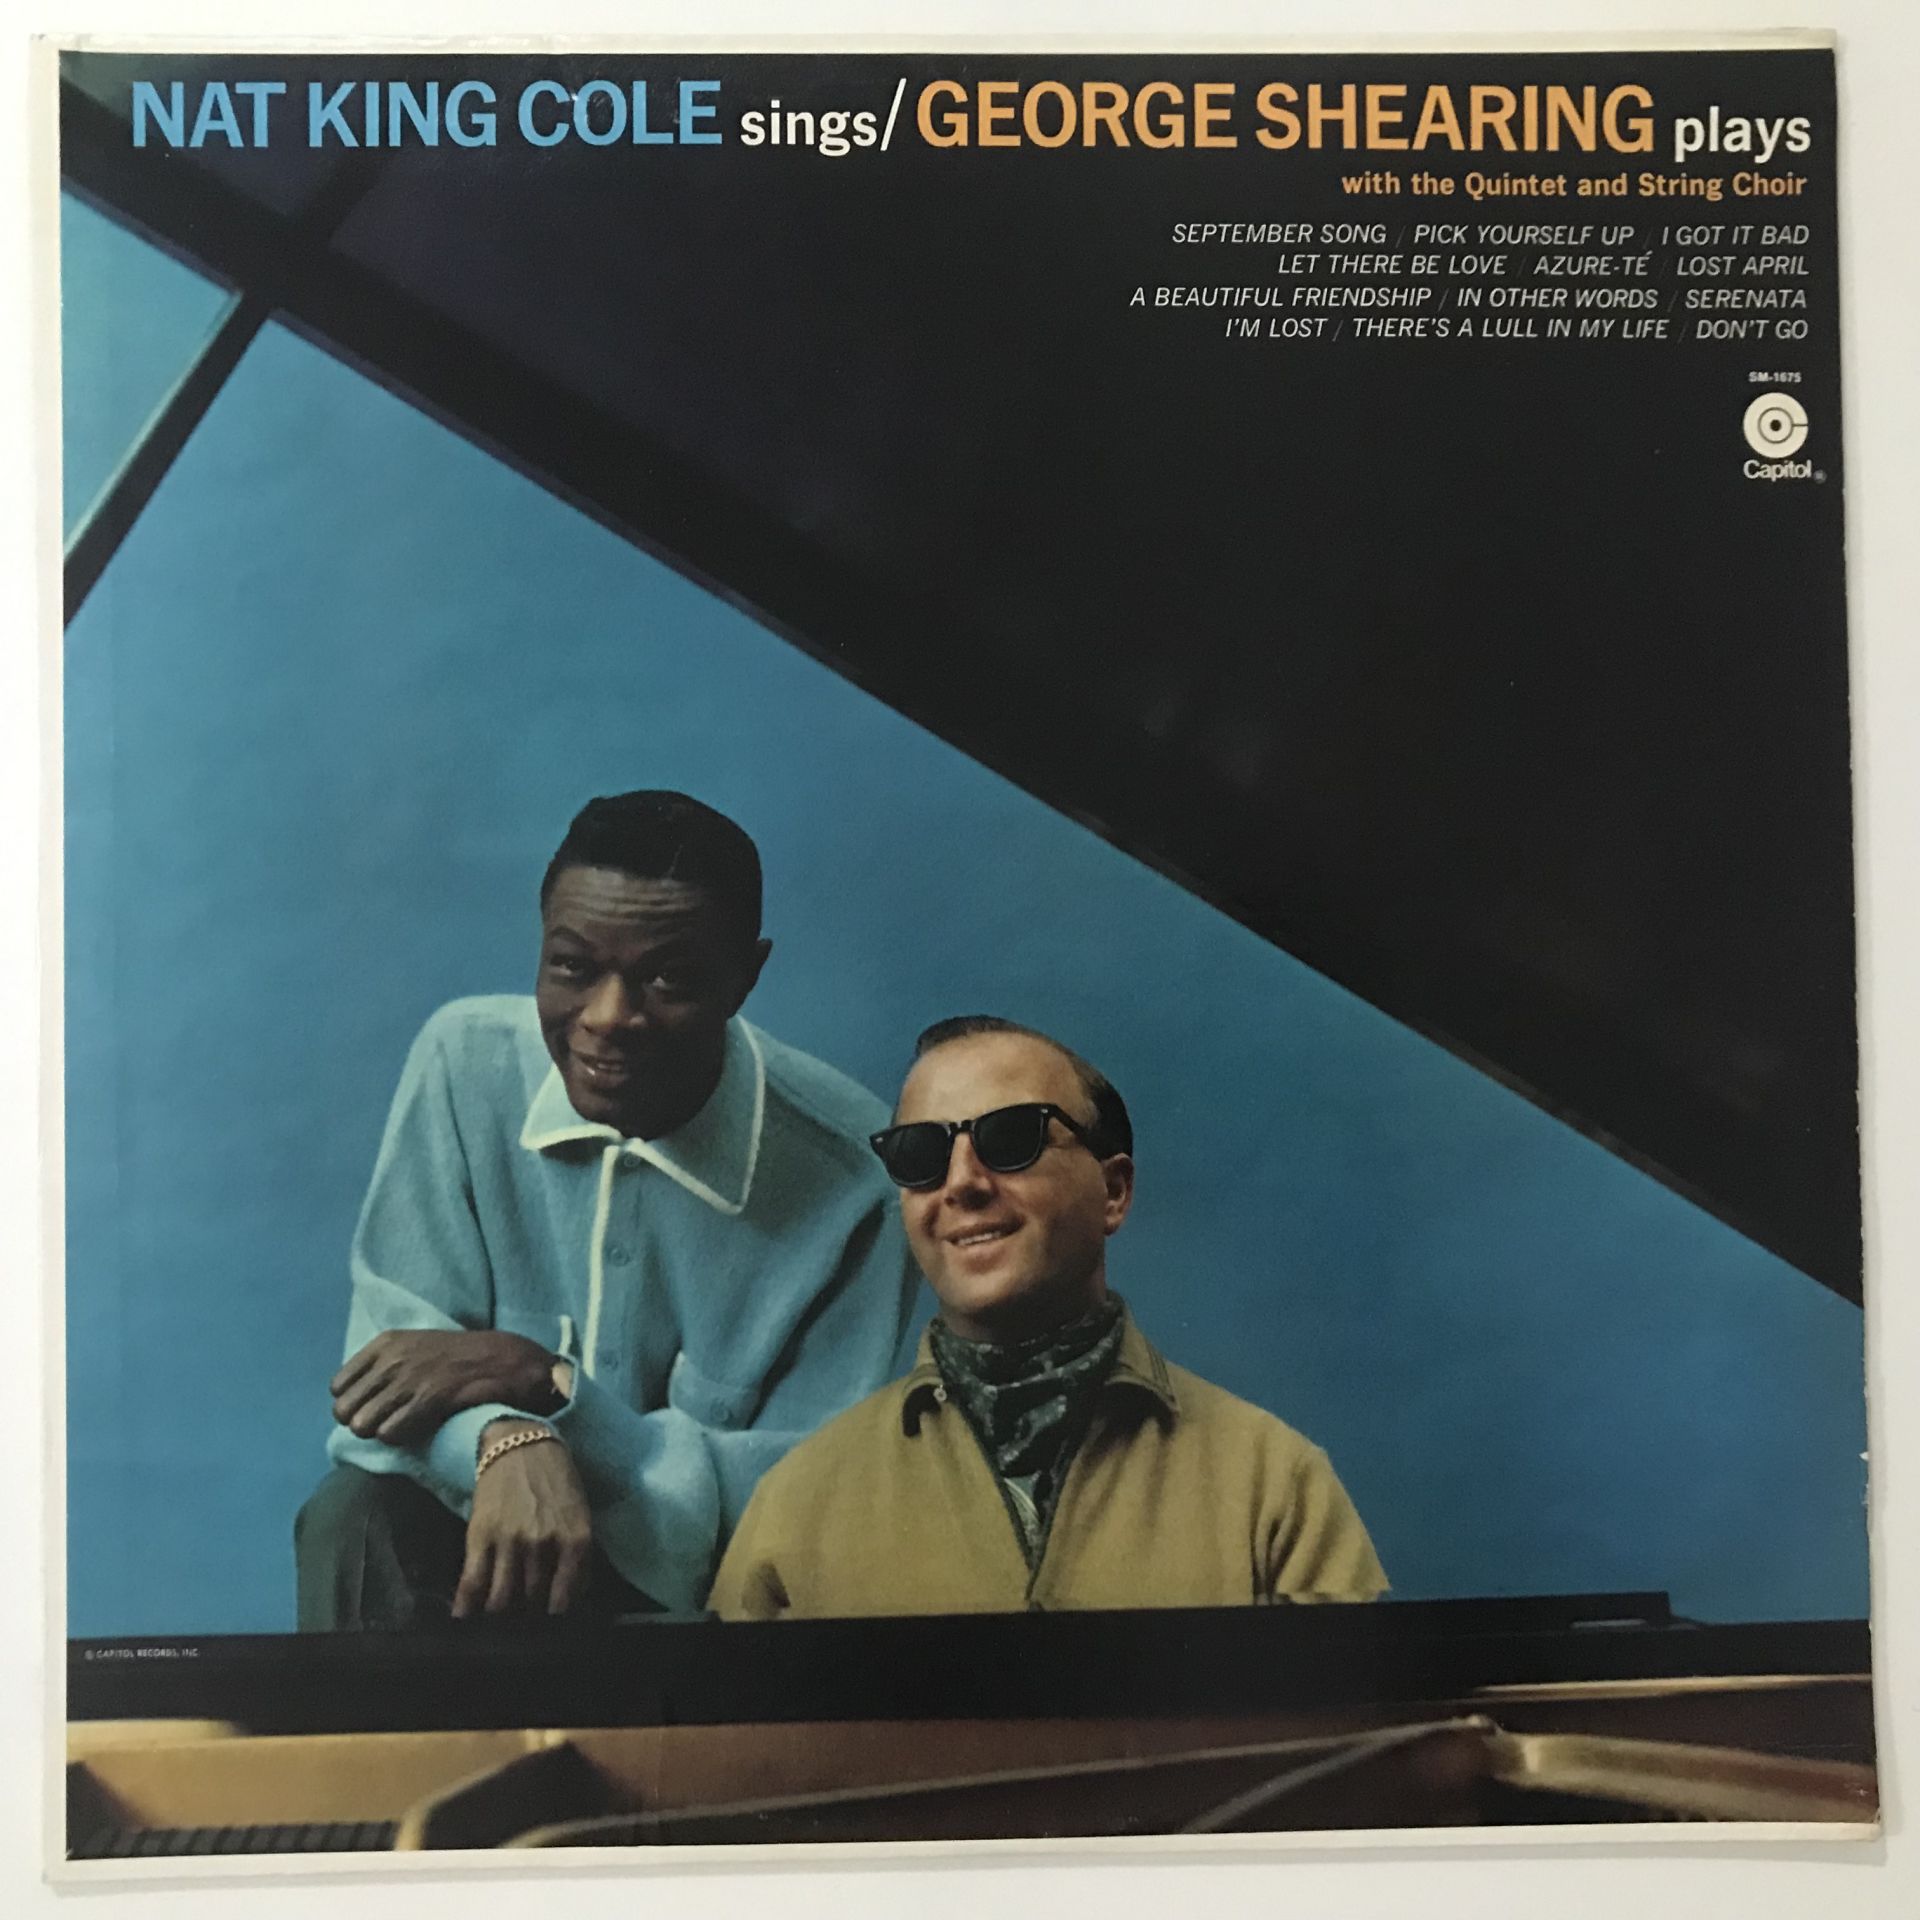 Nat King Cole & George Shearing – Nat King Cole Sings / George Shearing Plays